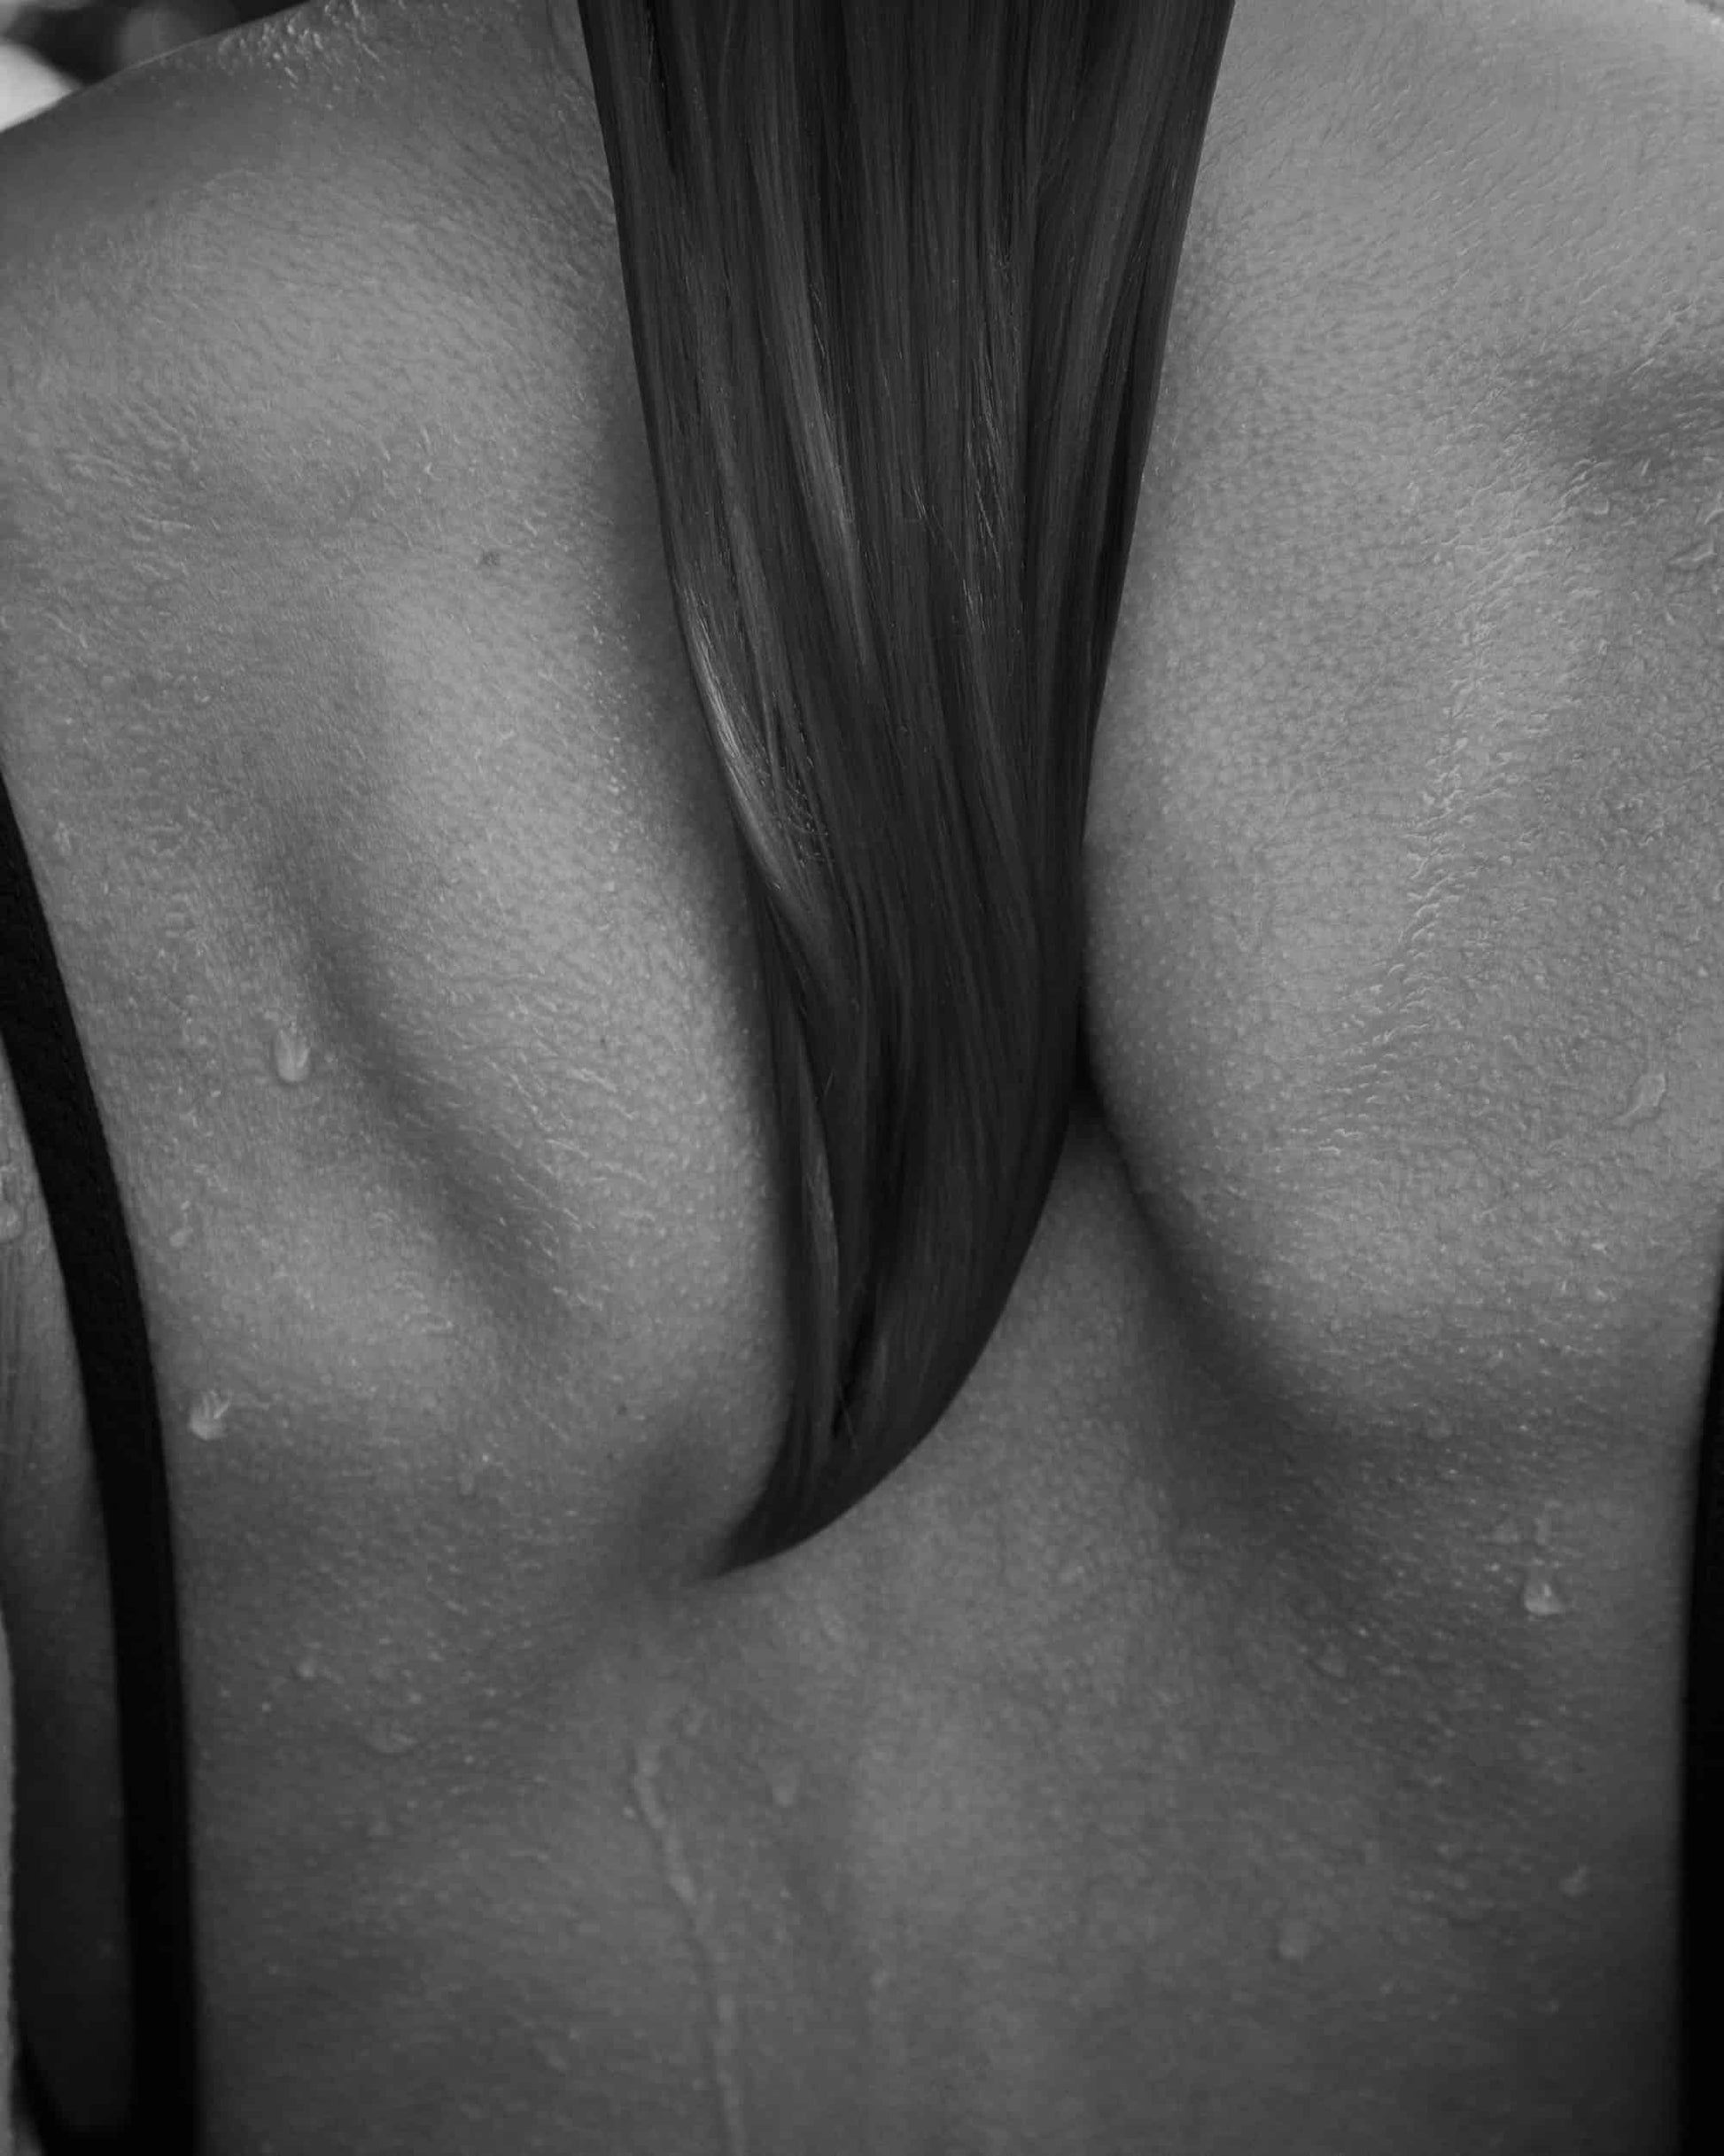 The artpiece 'Be' by Andreas Ortner shows a bare back with waterdrops on it and long hair hanging inbetween the shoulderblades, in black and white.